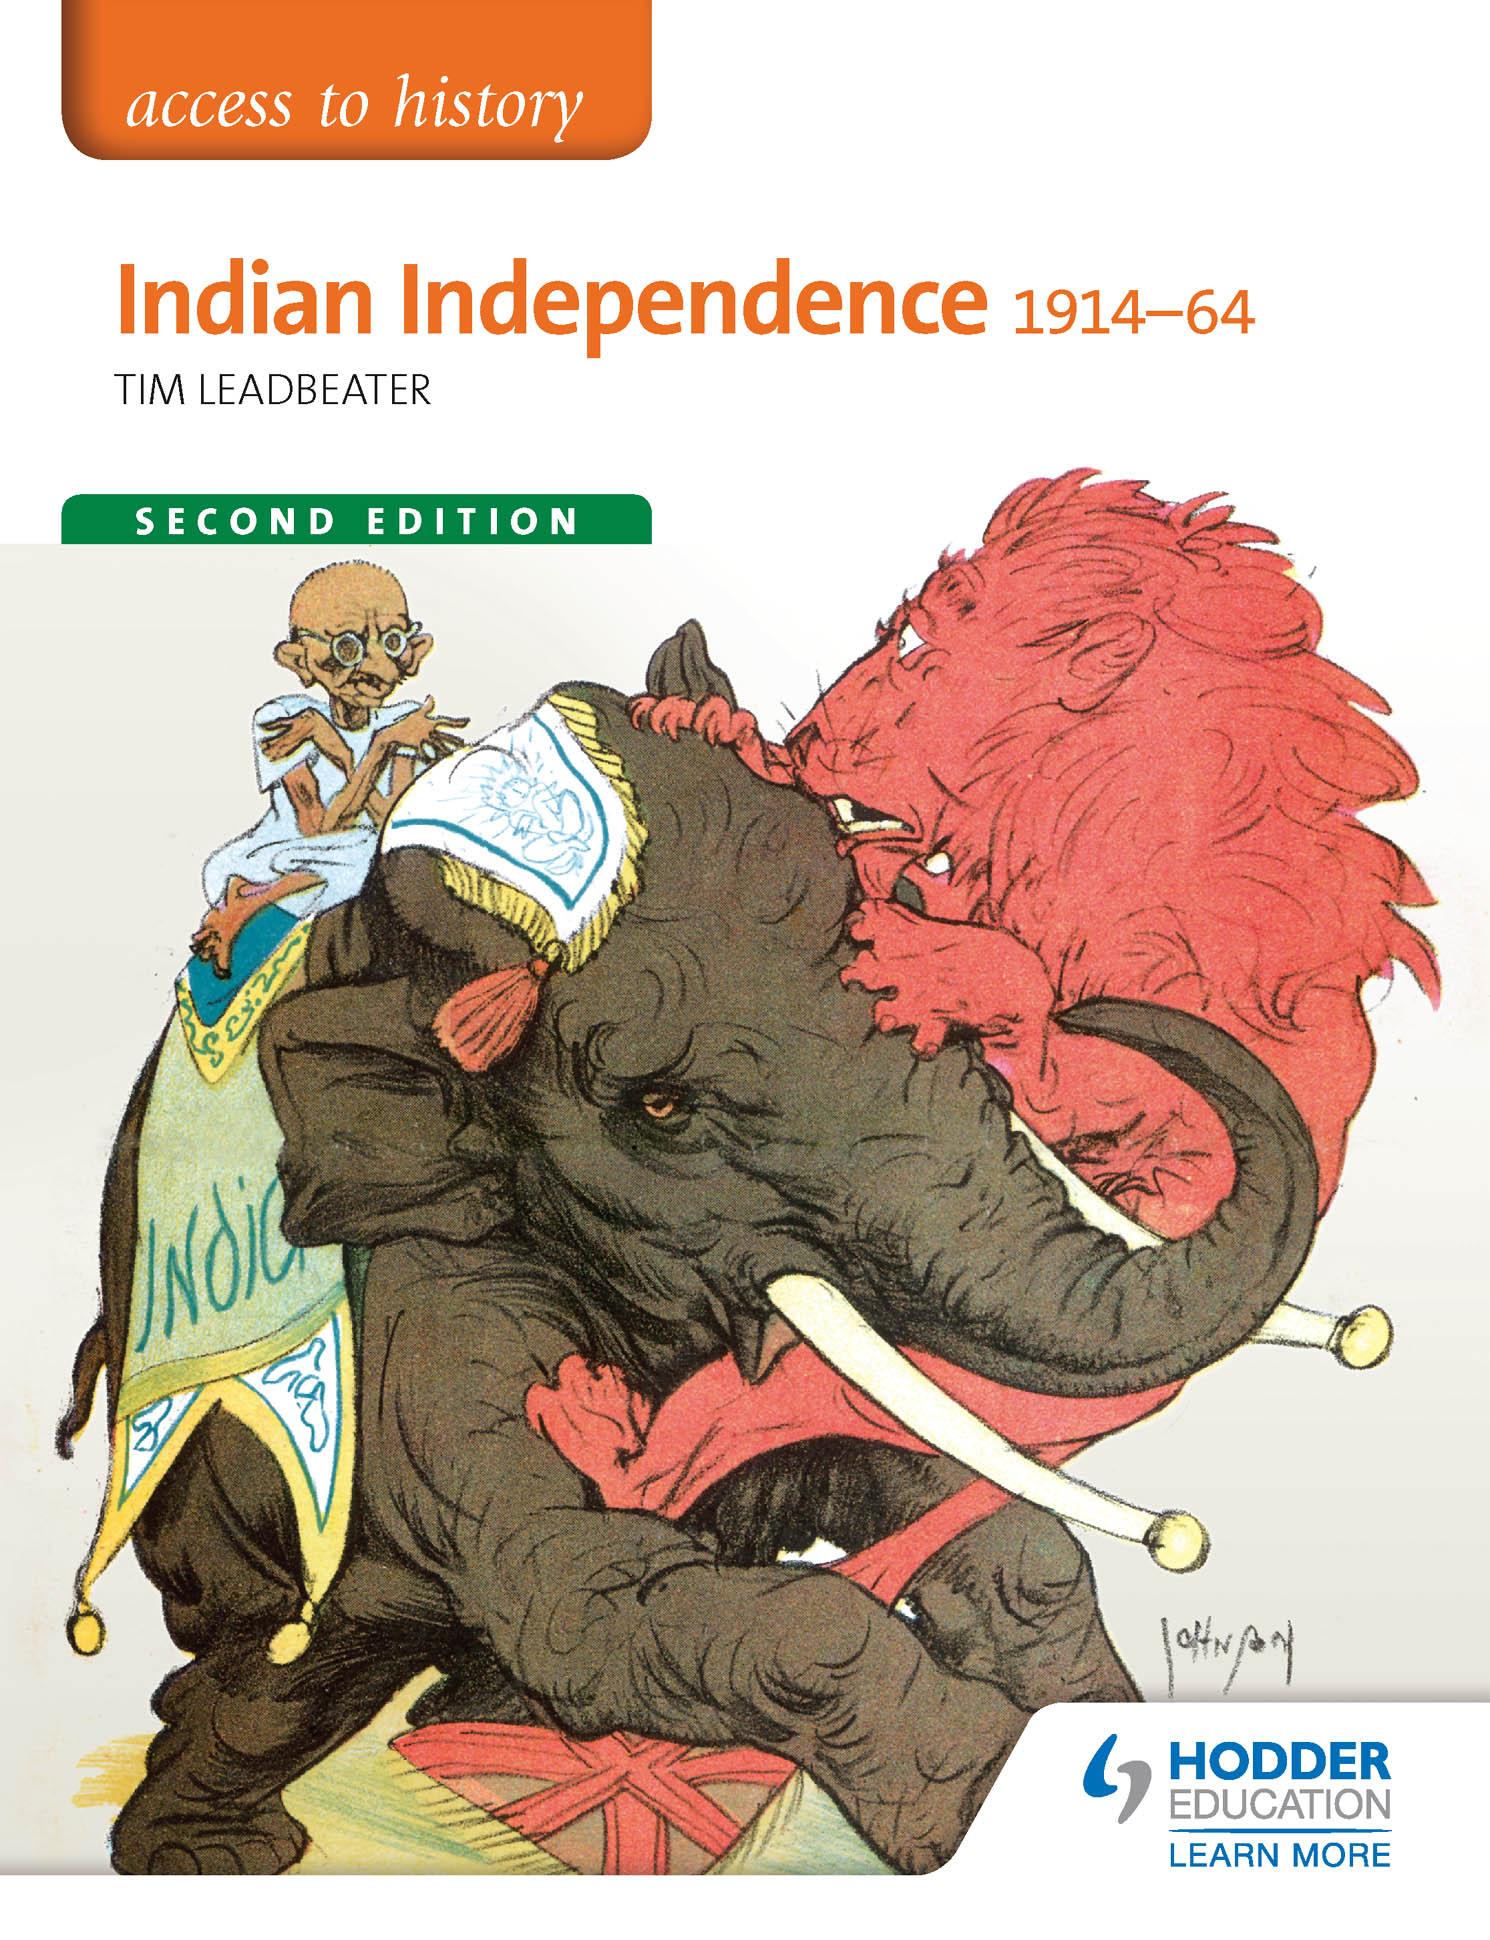 Access to History: Indian Independence 1914-64 Second Edition